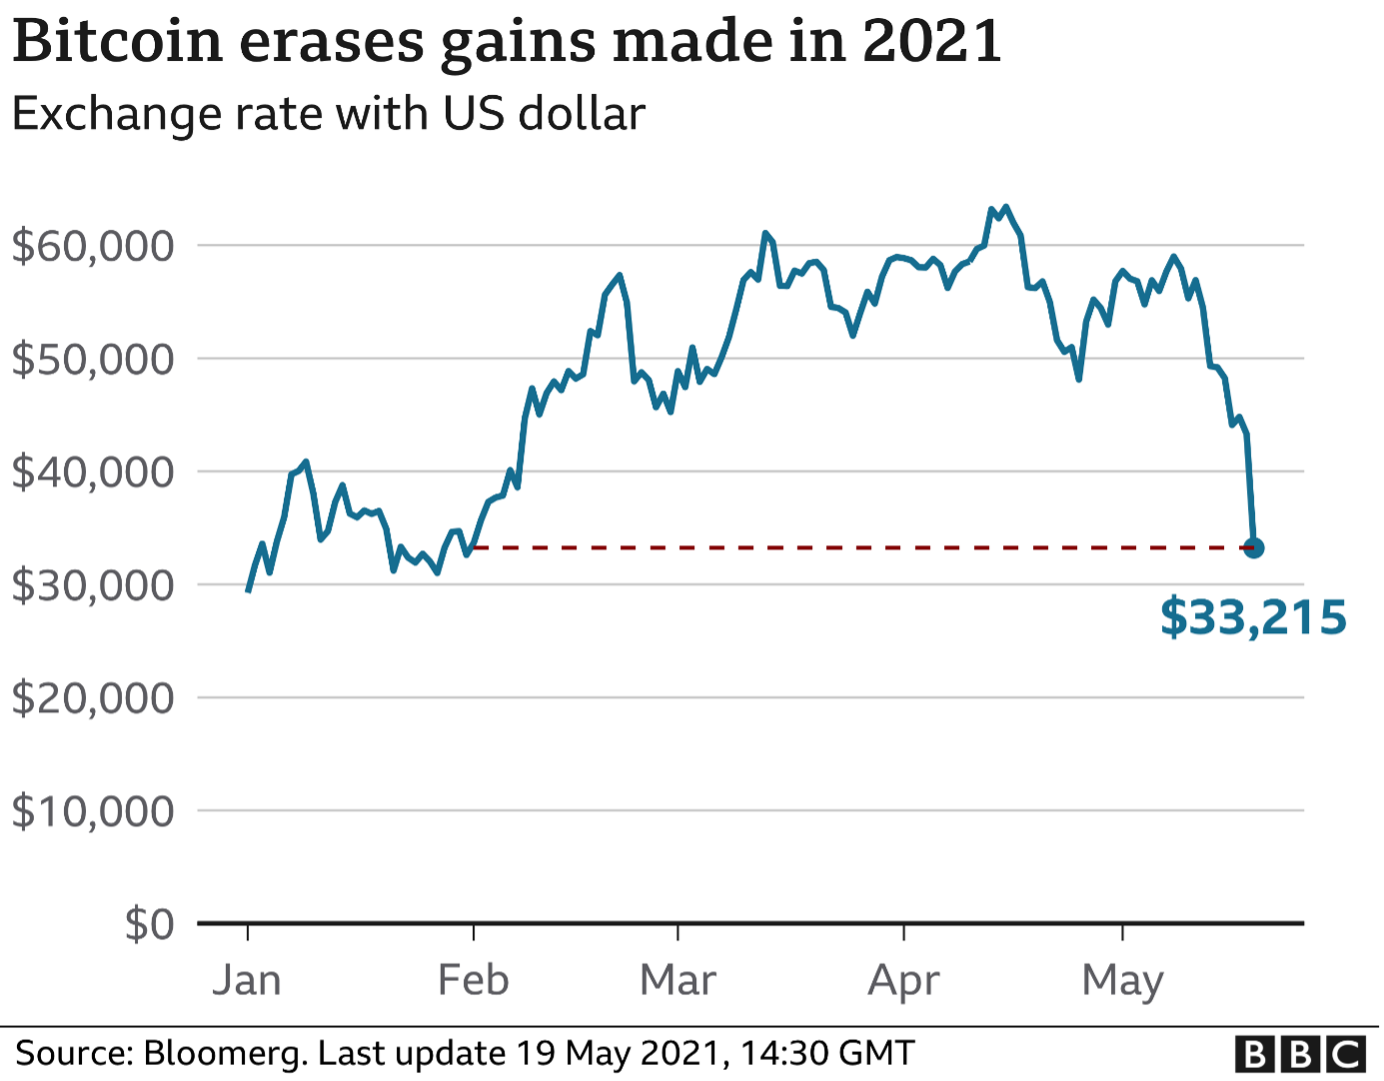 Bitcoin erases gains in 2021